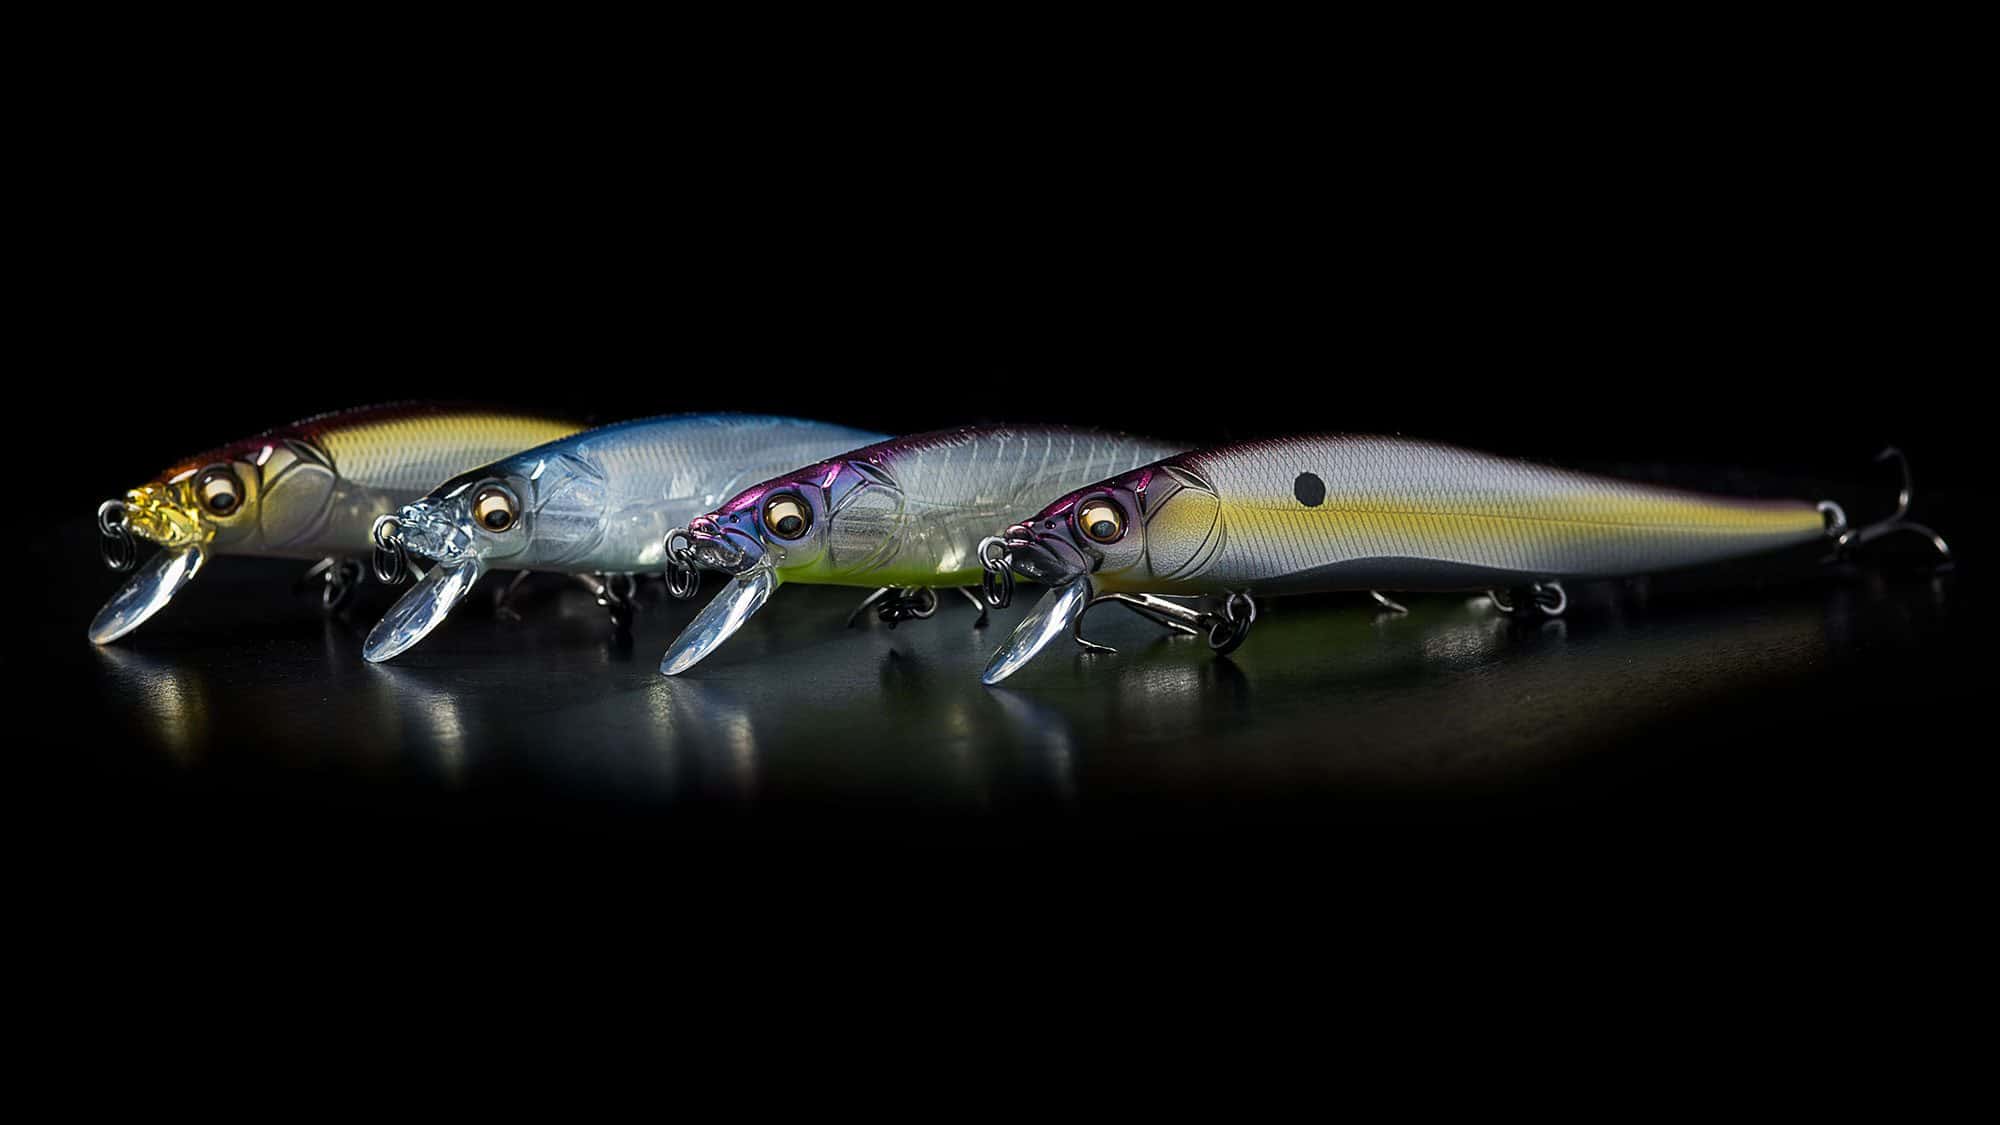 VISION 110 JERKBAIT REVIEW: WIRED2FISH - Megabass